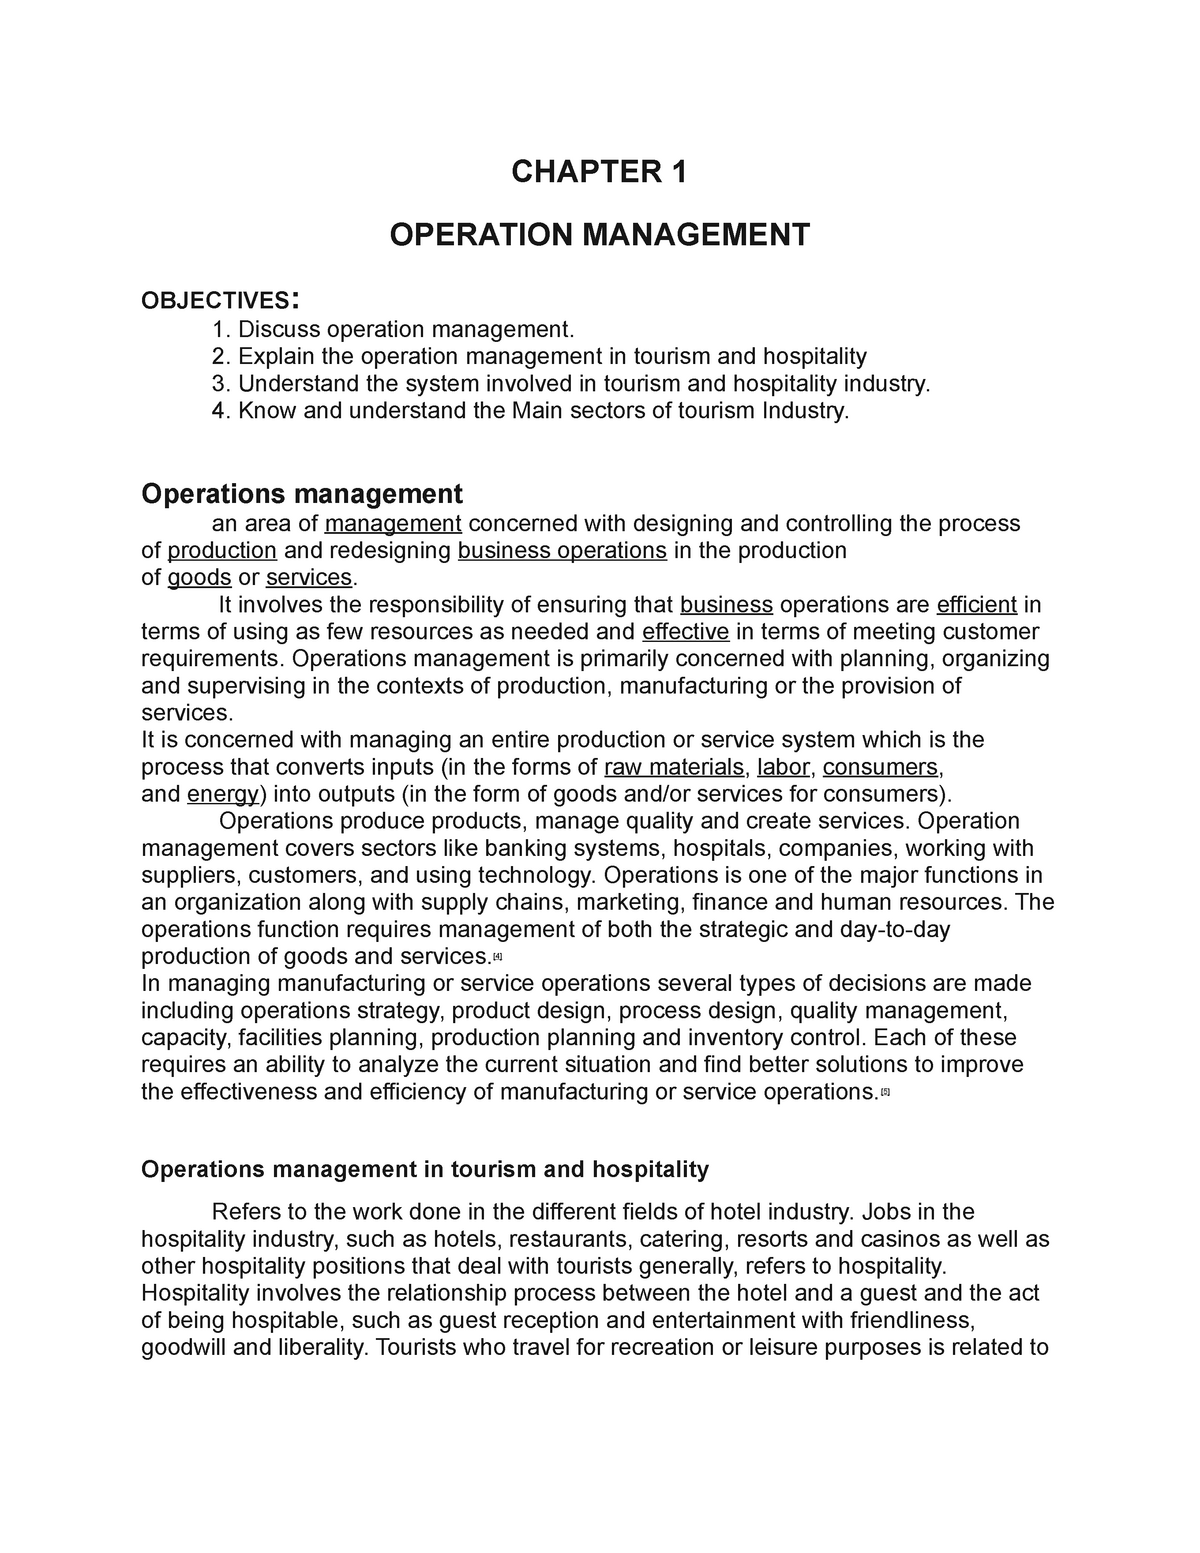 what is operations management essay